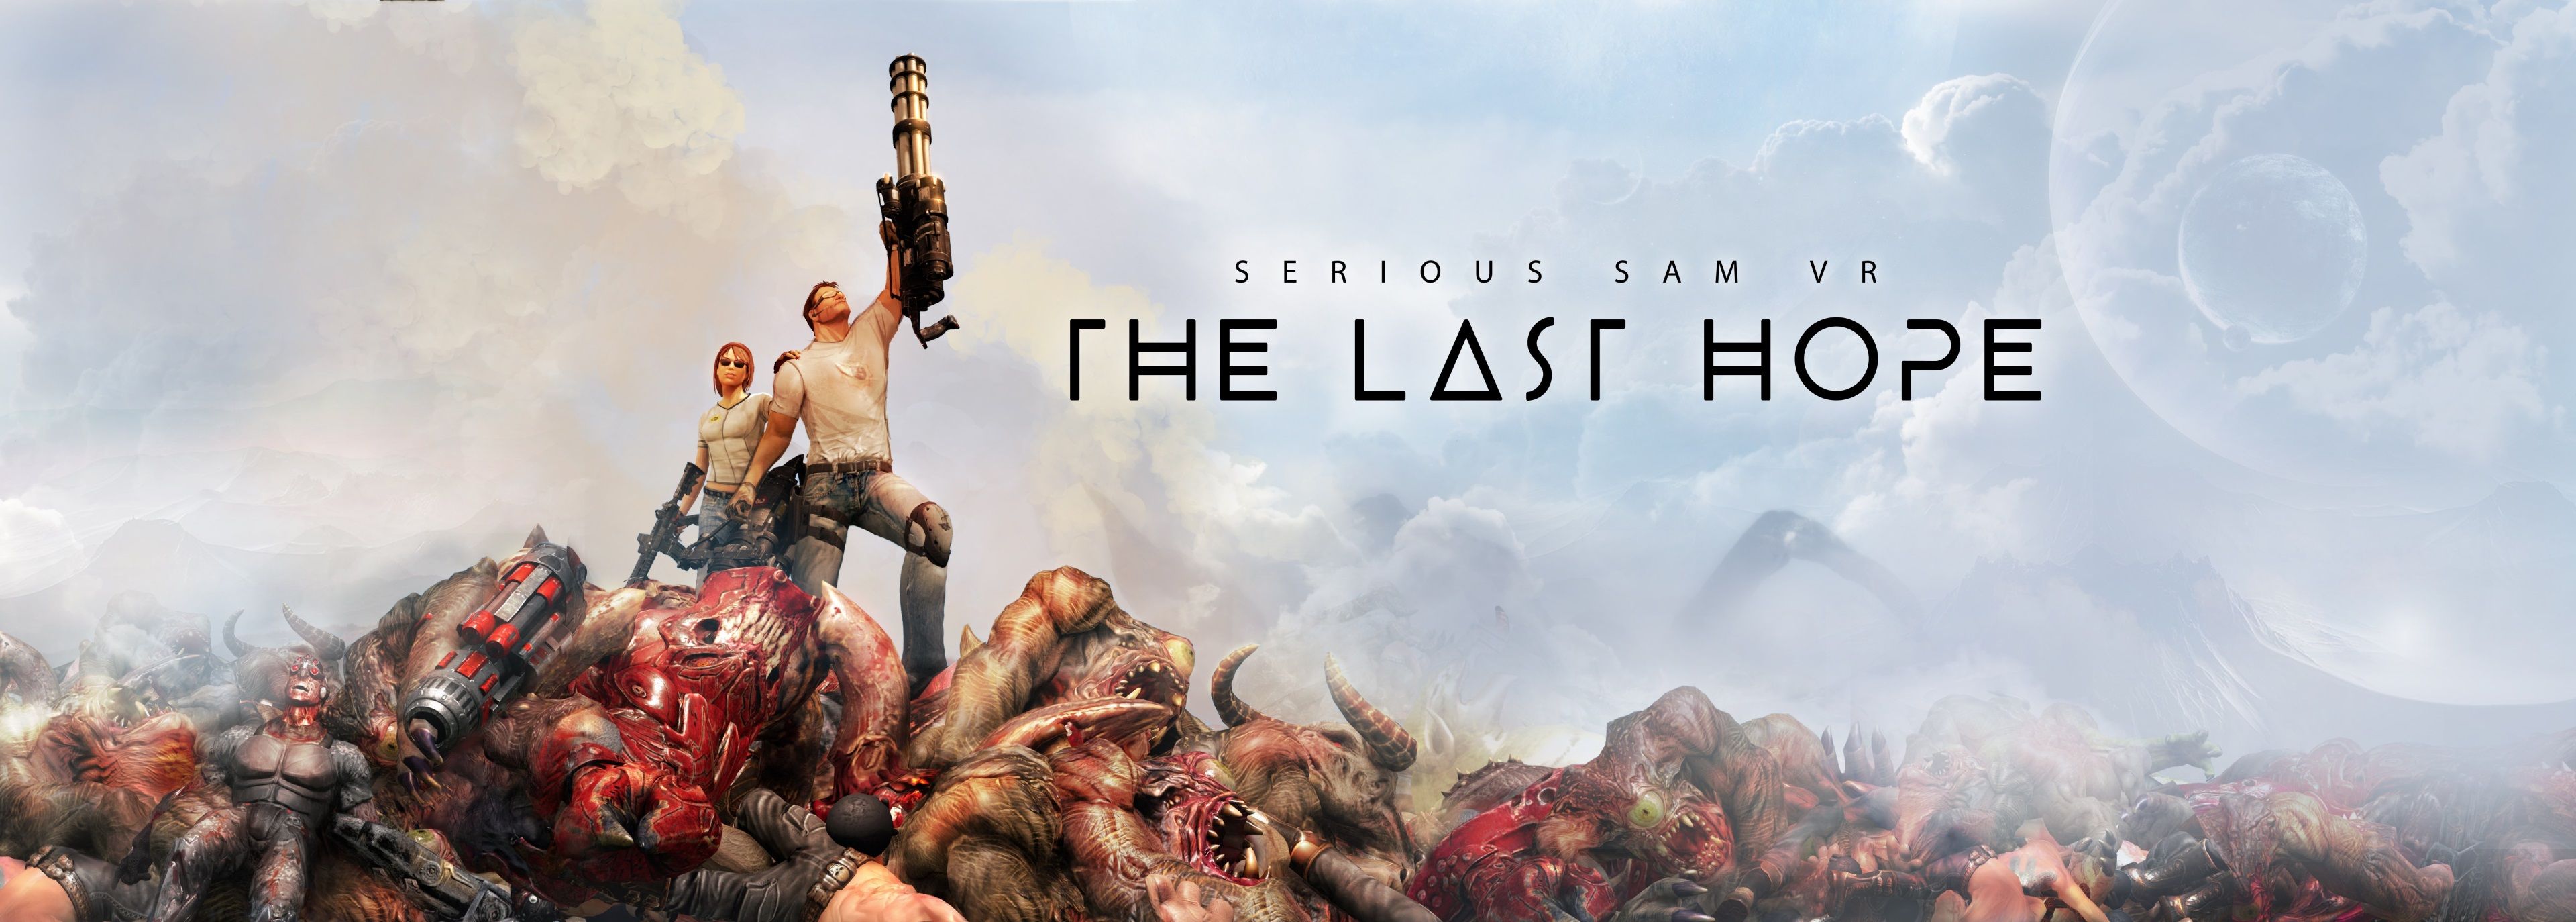 download free the last hope vr